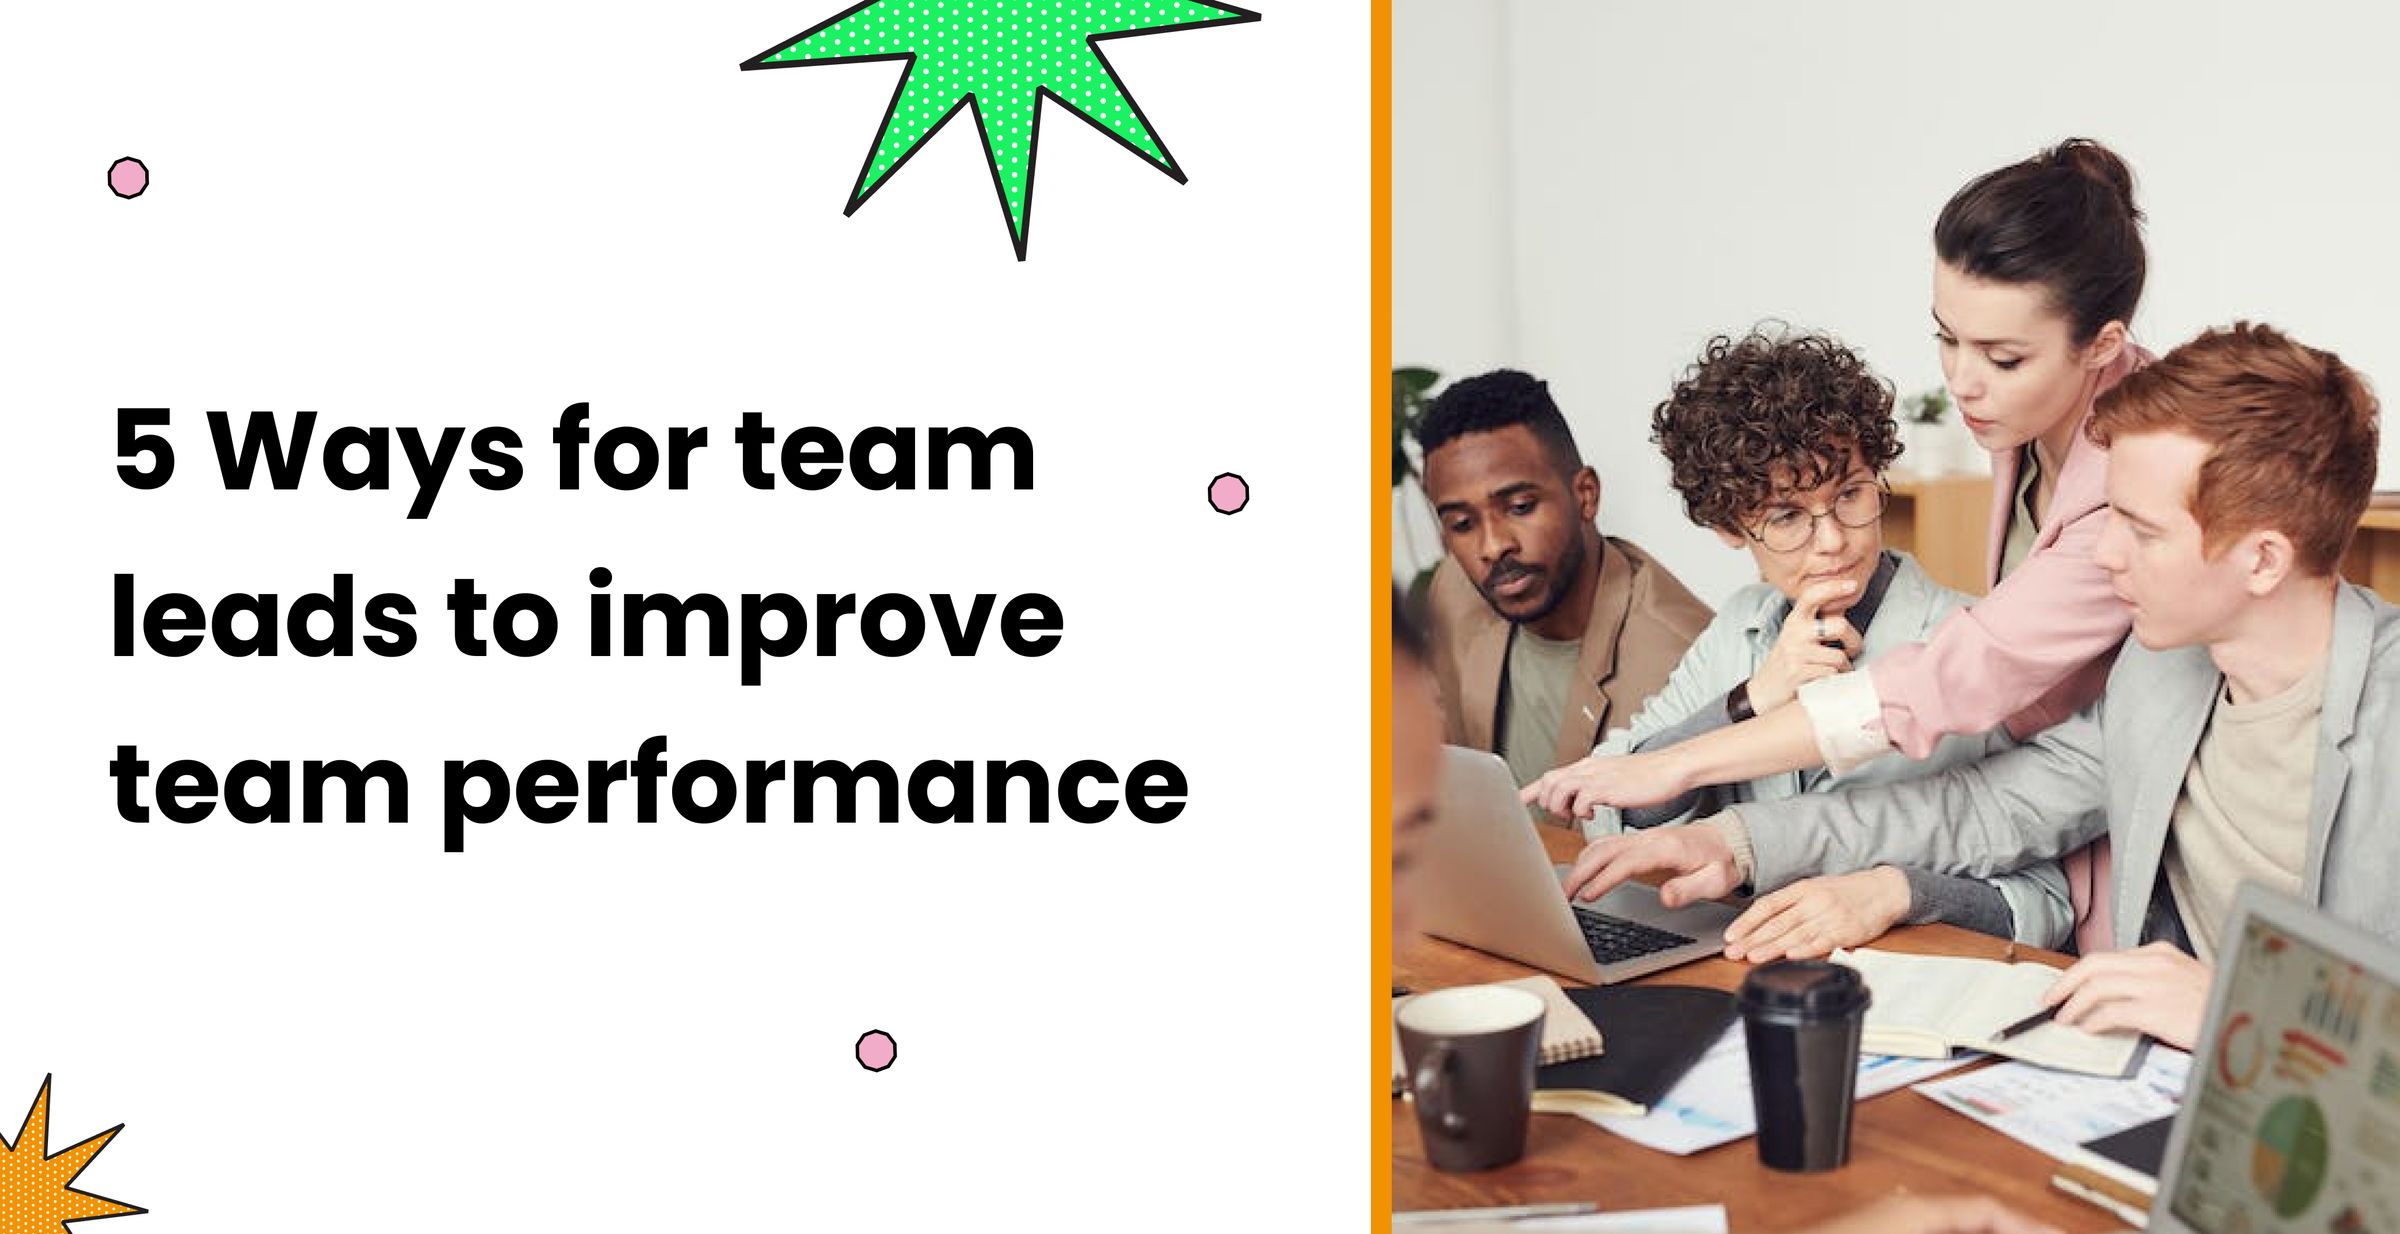 5 Ways for team leads to improve team performance